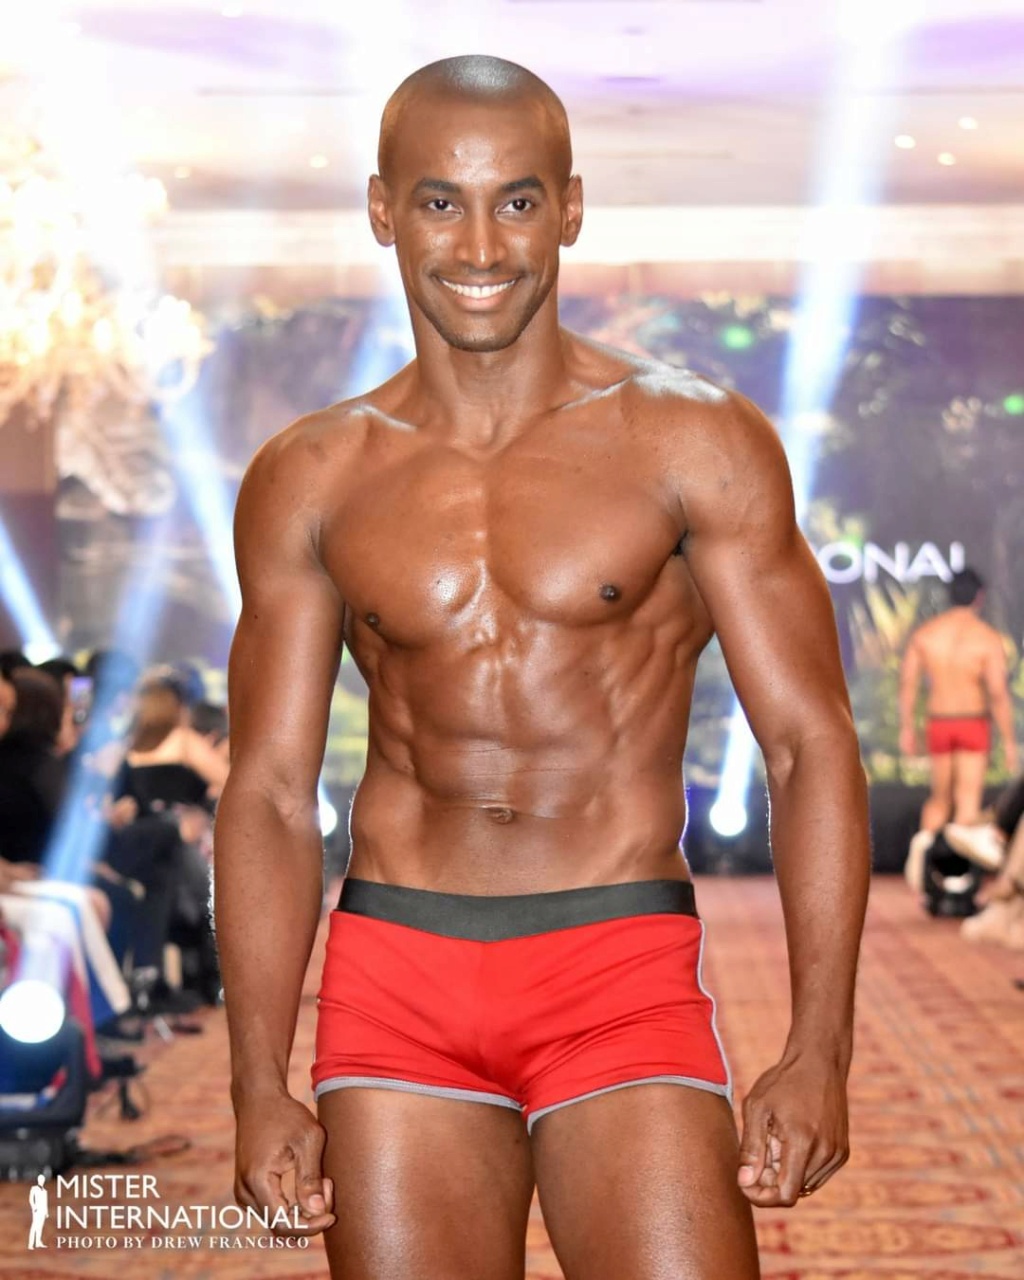 14th Mister International in Manila, Philippines - Oct 30th, 2022 - Winner is Dominican Republic - Page 4 Fb_i1167